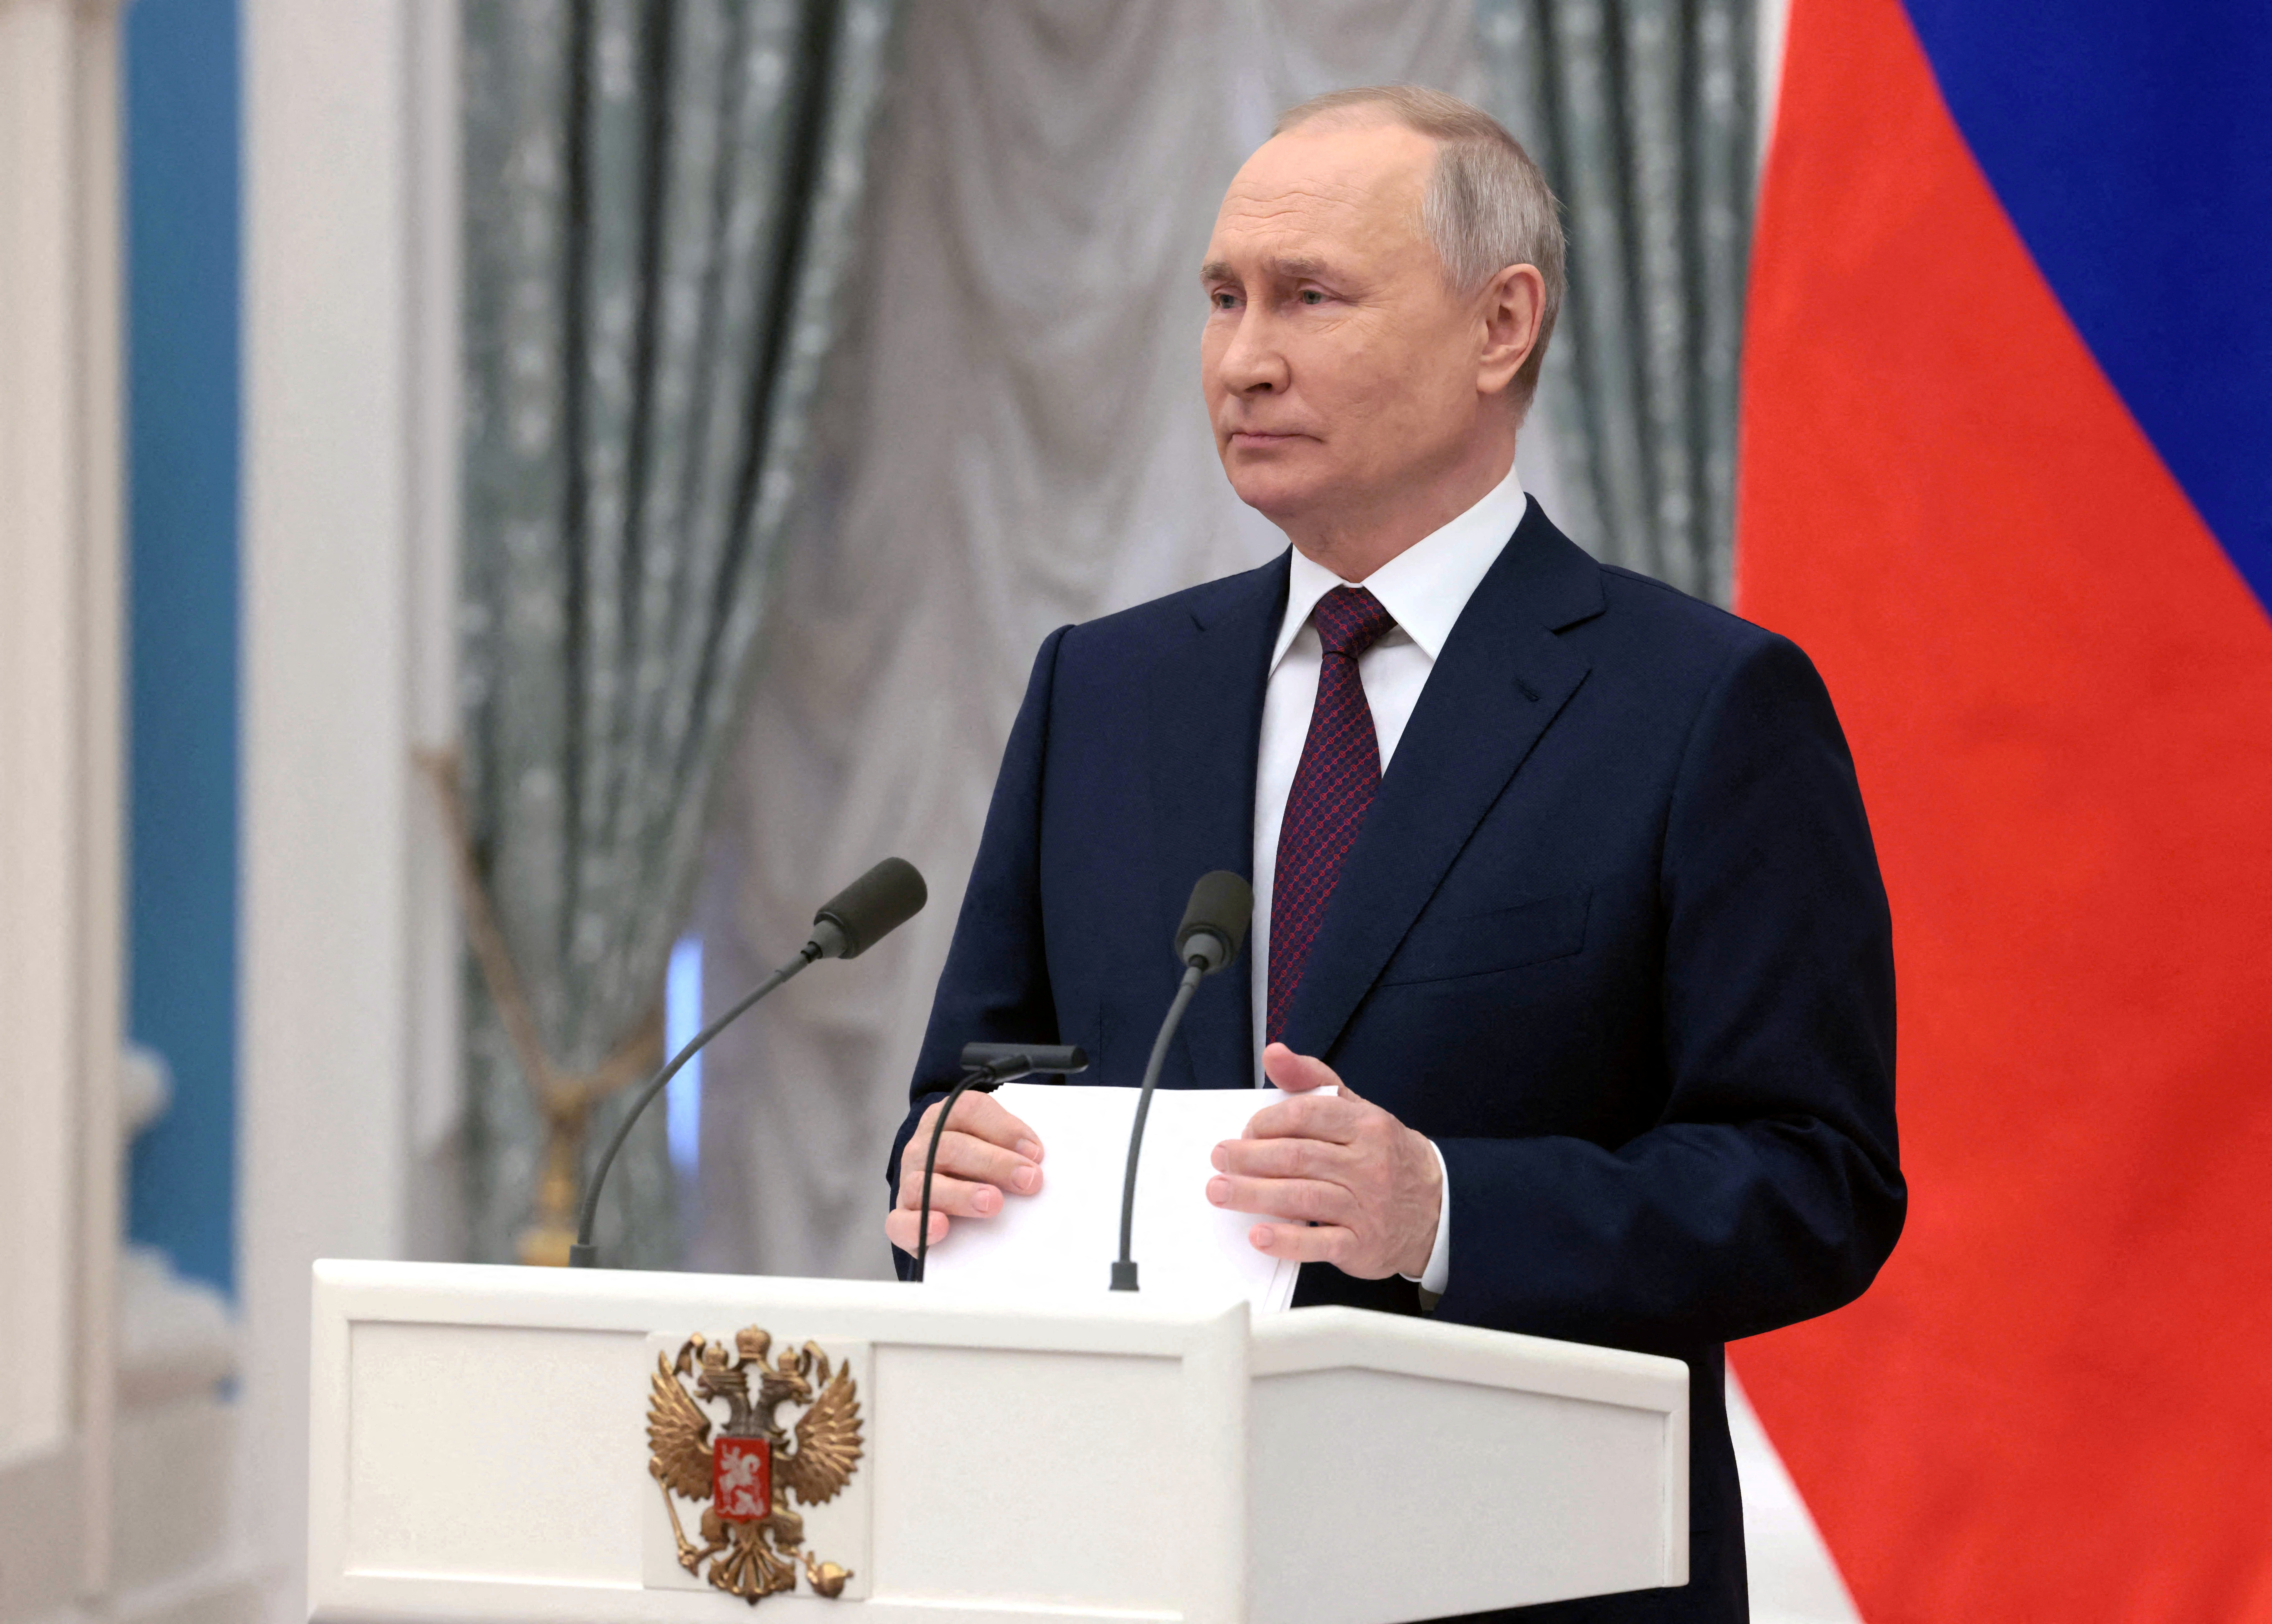 Russian President Vladimir Putin .  Sputnik/Mikhail Metzel/Pool via REUTERS ATTENTION EDITORS: THIS PICTURE WAS PROVIDED BY A THIRD PARTY./File Photo